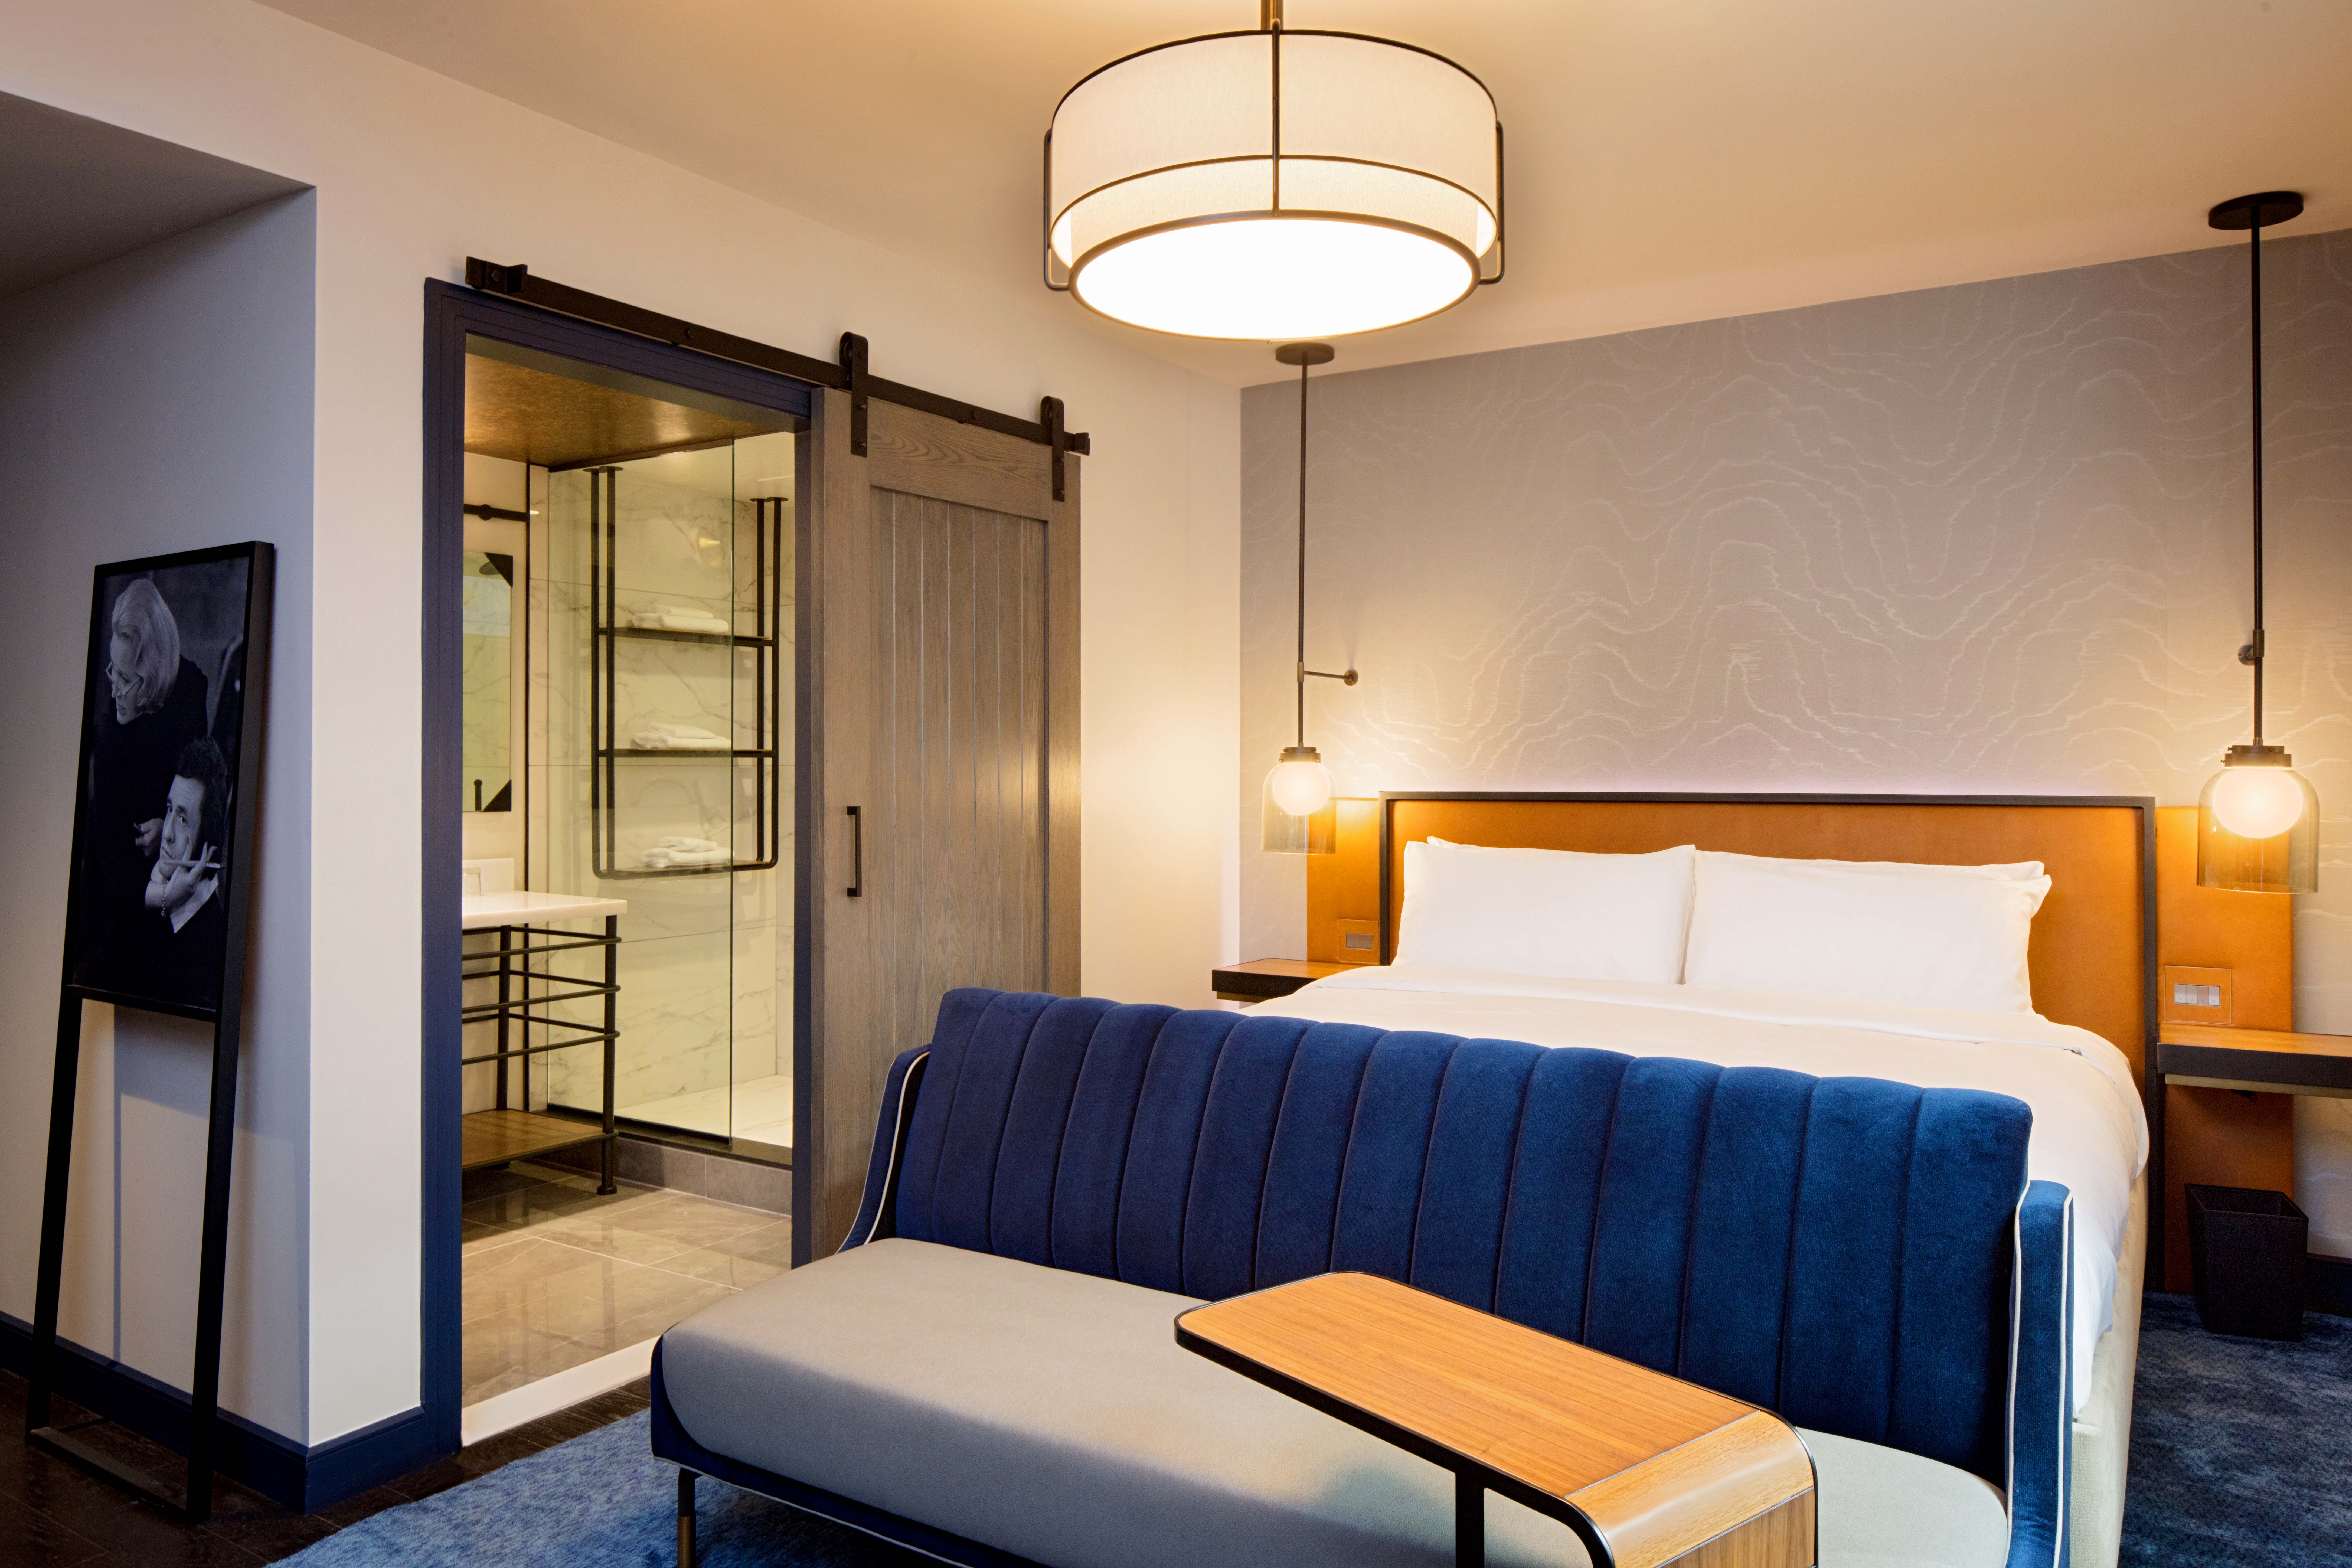 HotelSpaces 7 Ways to Reduce Guest Room Size Without Losing Luxury